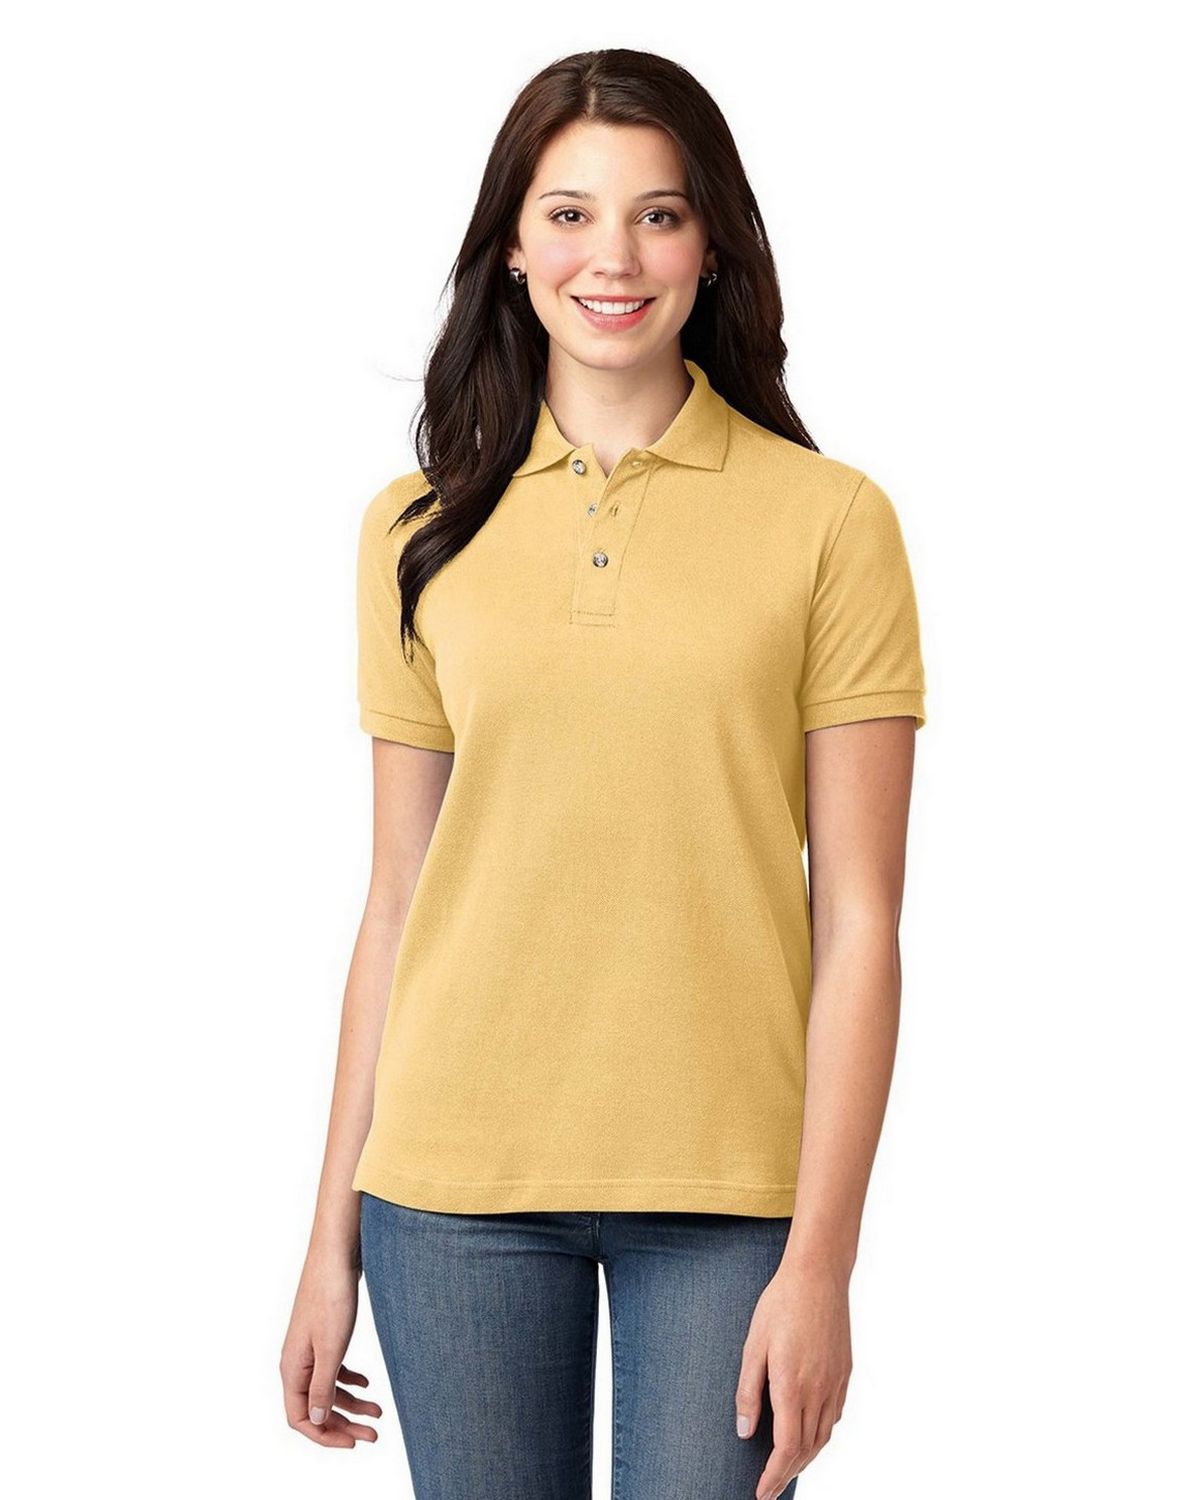 Small Ladies Pique Knit Polo Shirt Yellow L420 Port Authority 